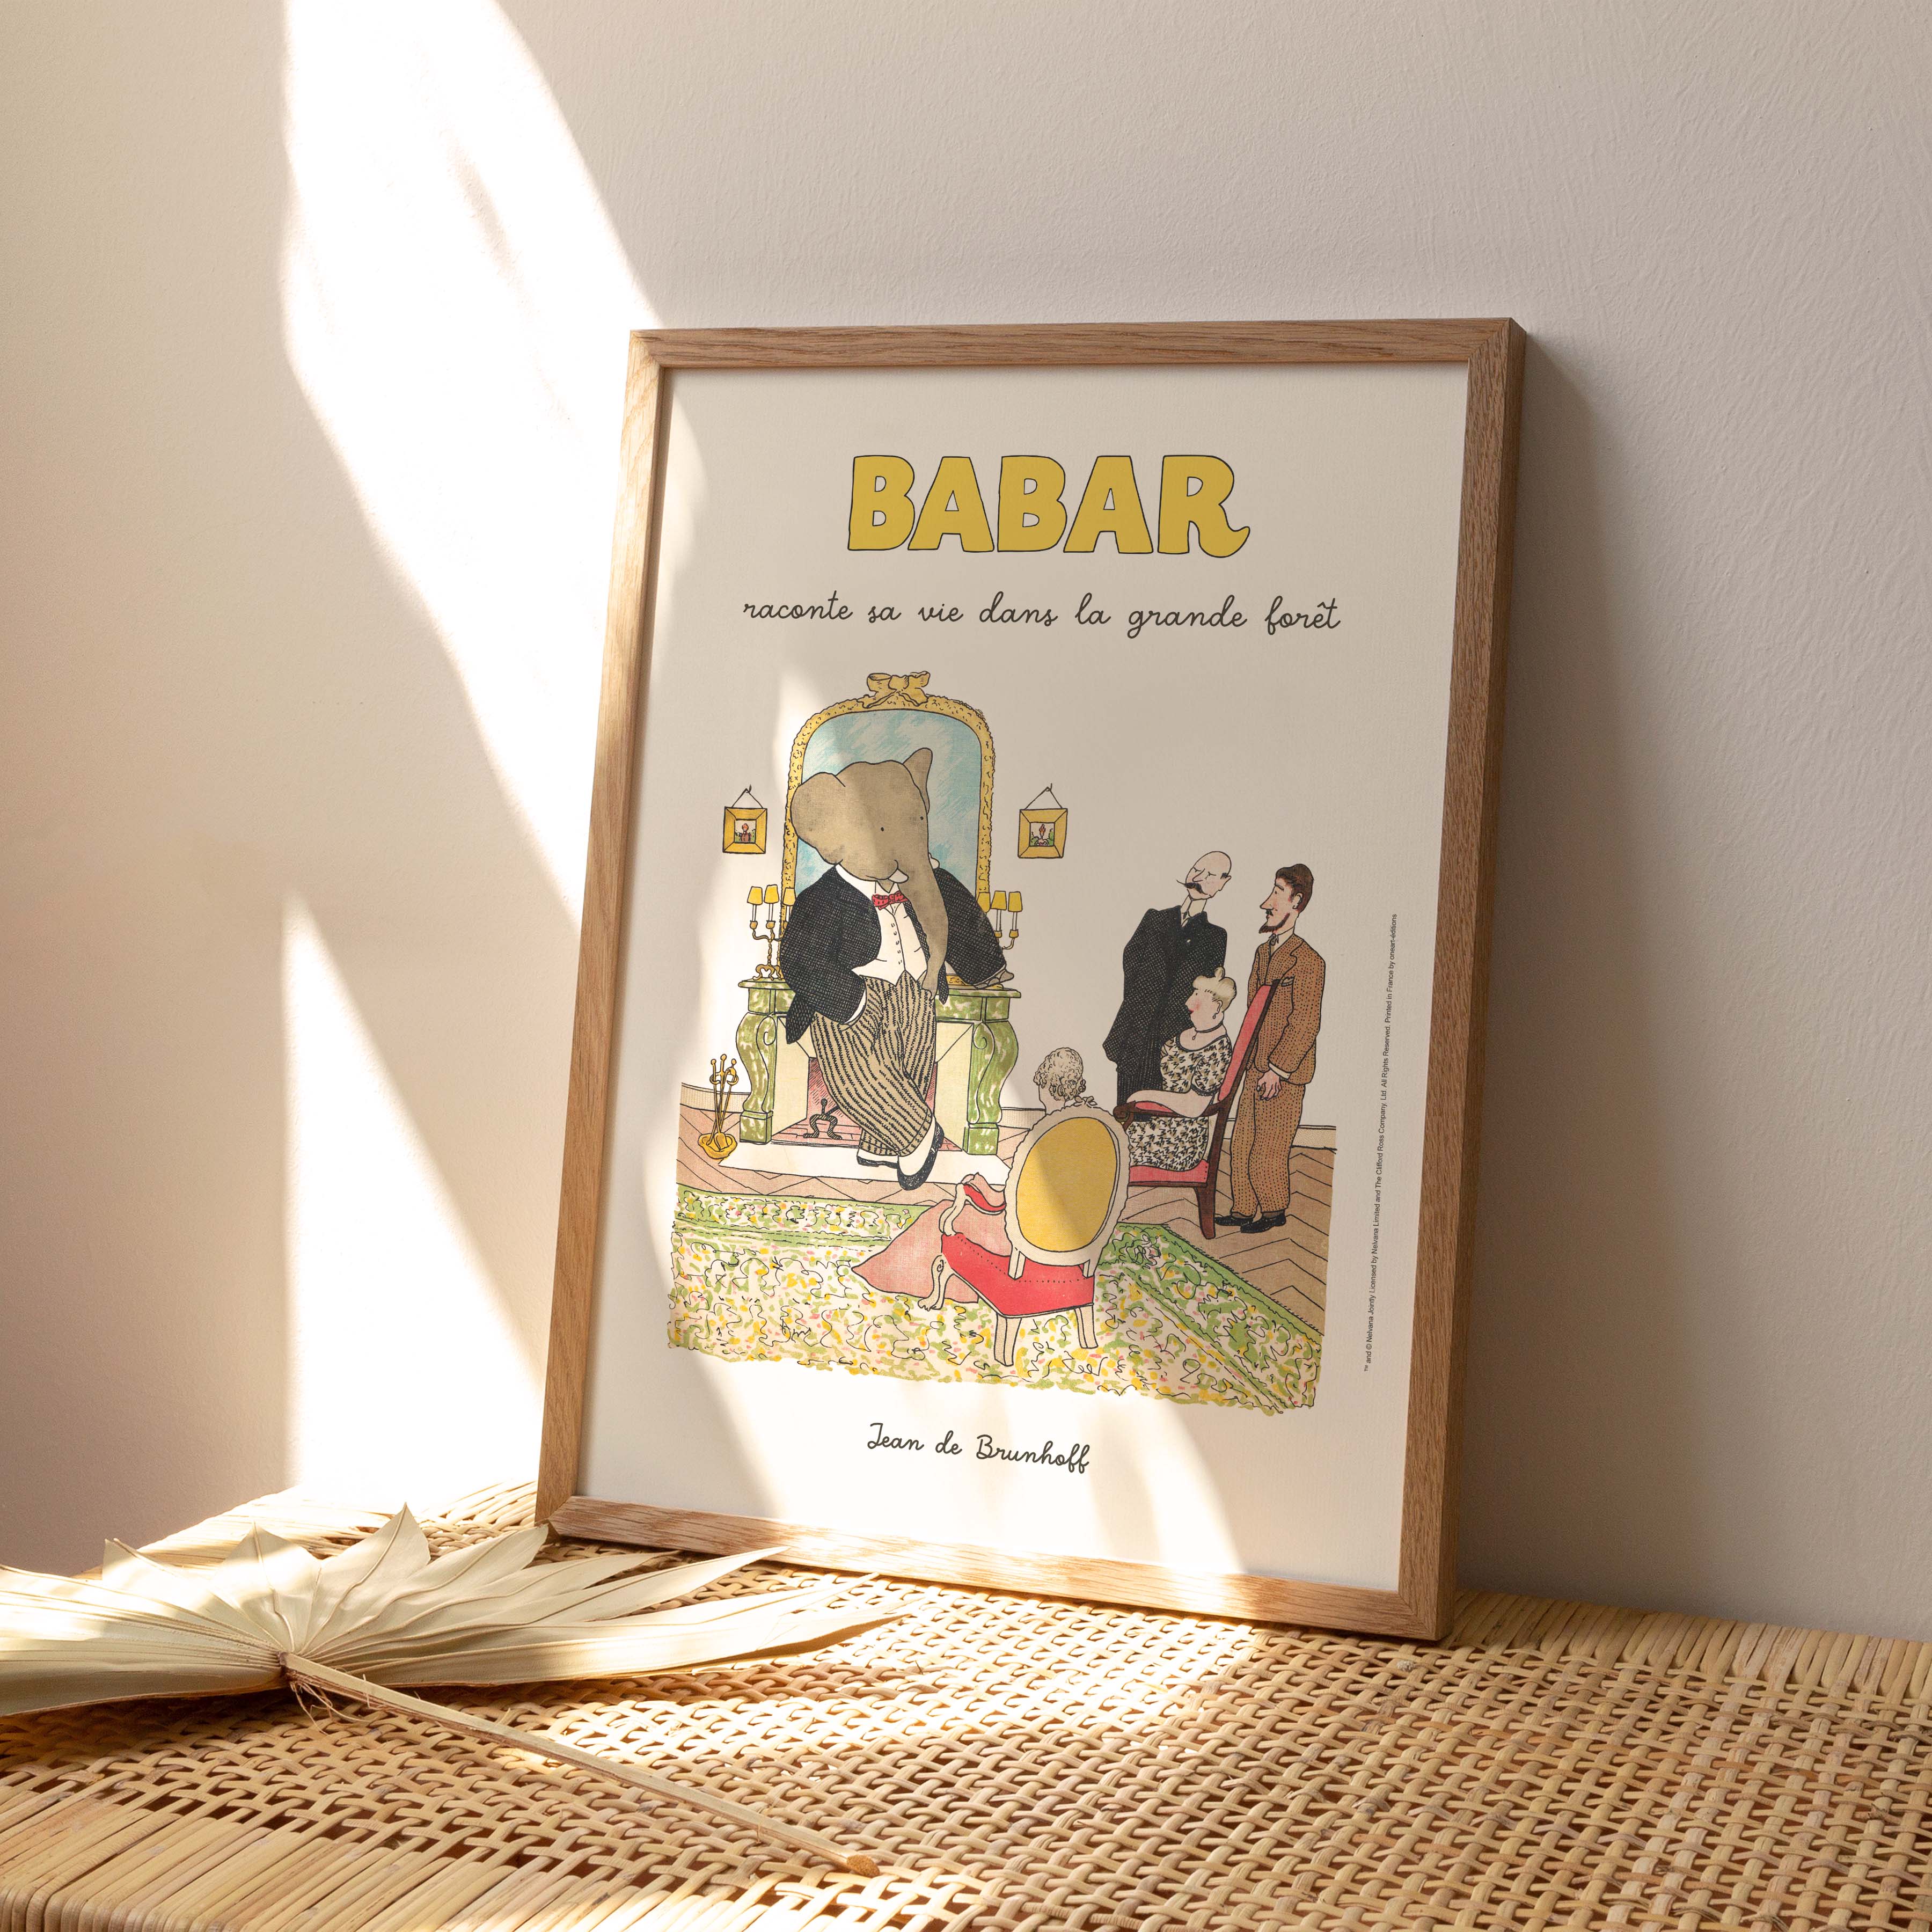 Babar poster tells his life in the great forest